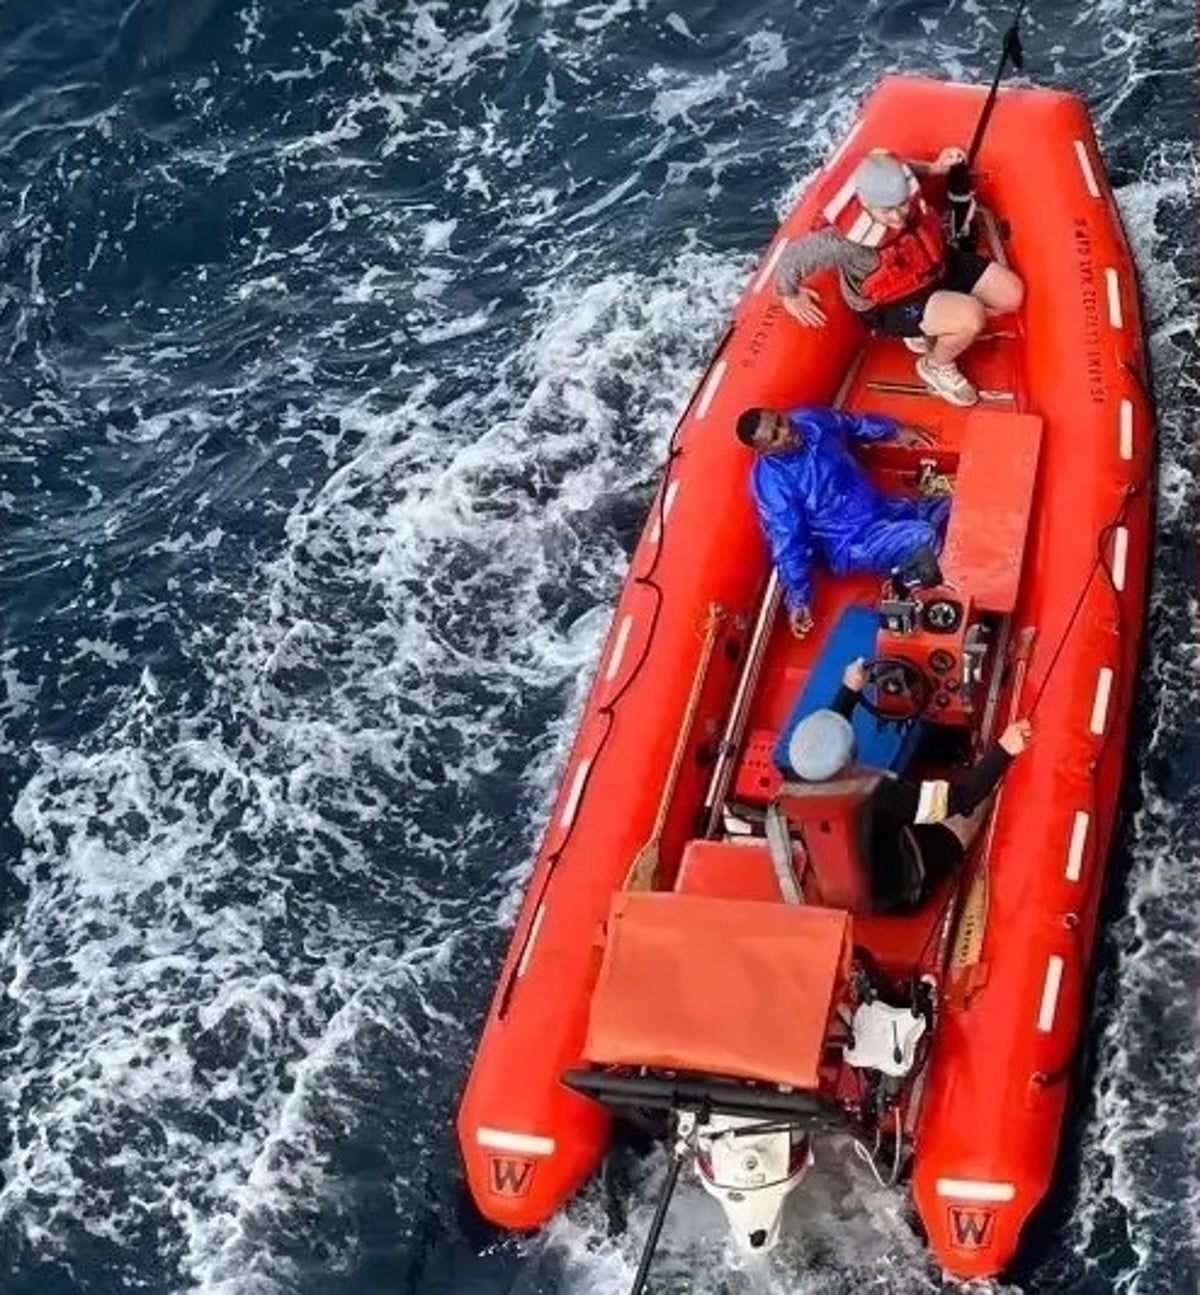 US forces rescue man found clinging to cooler lid ten miles out at sea